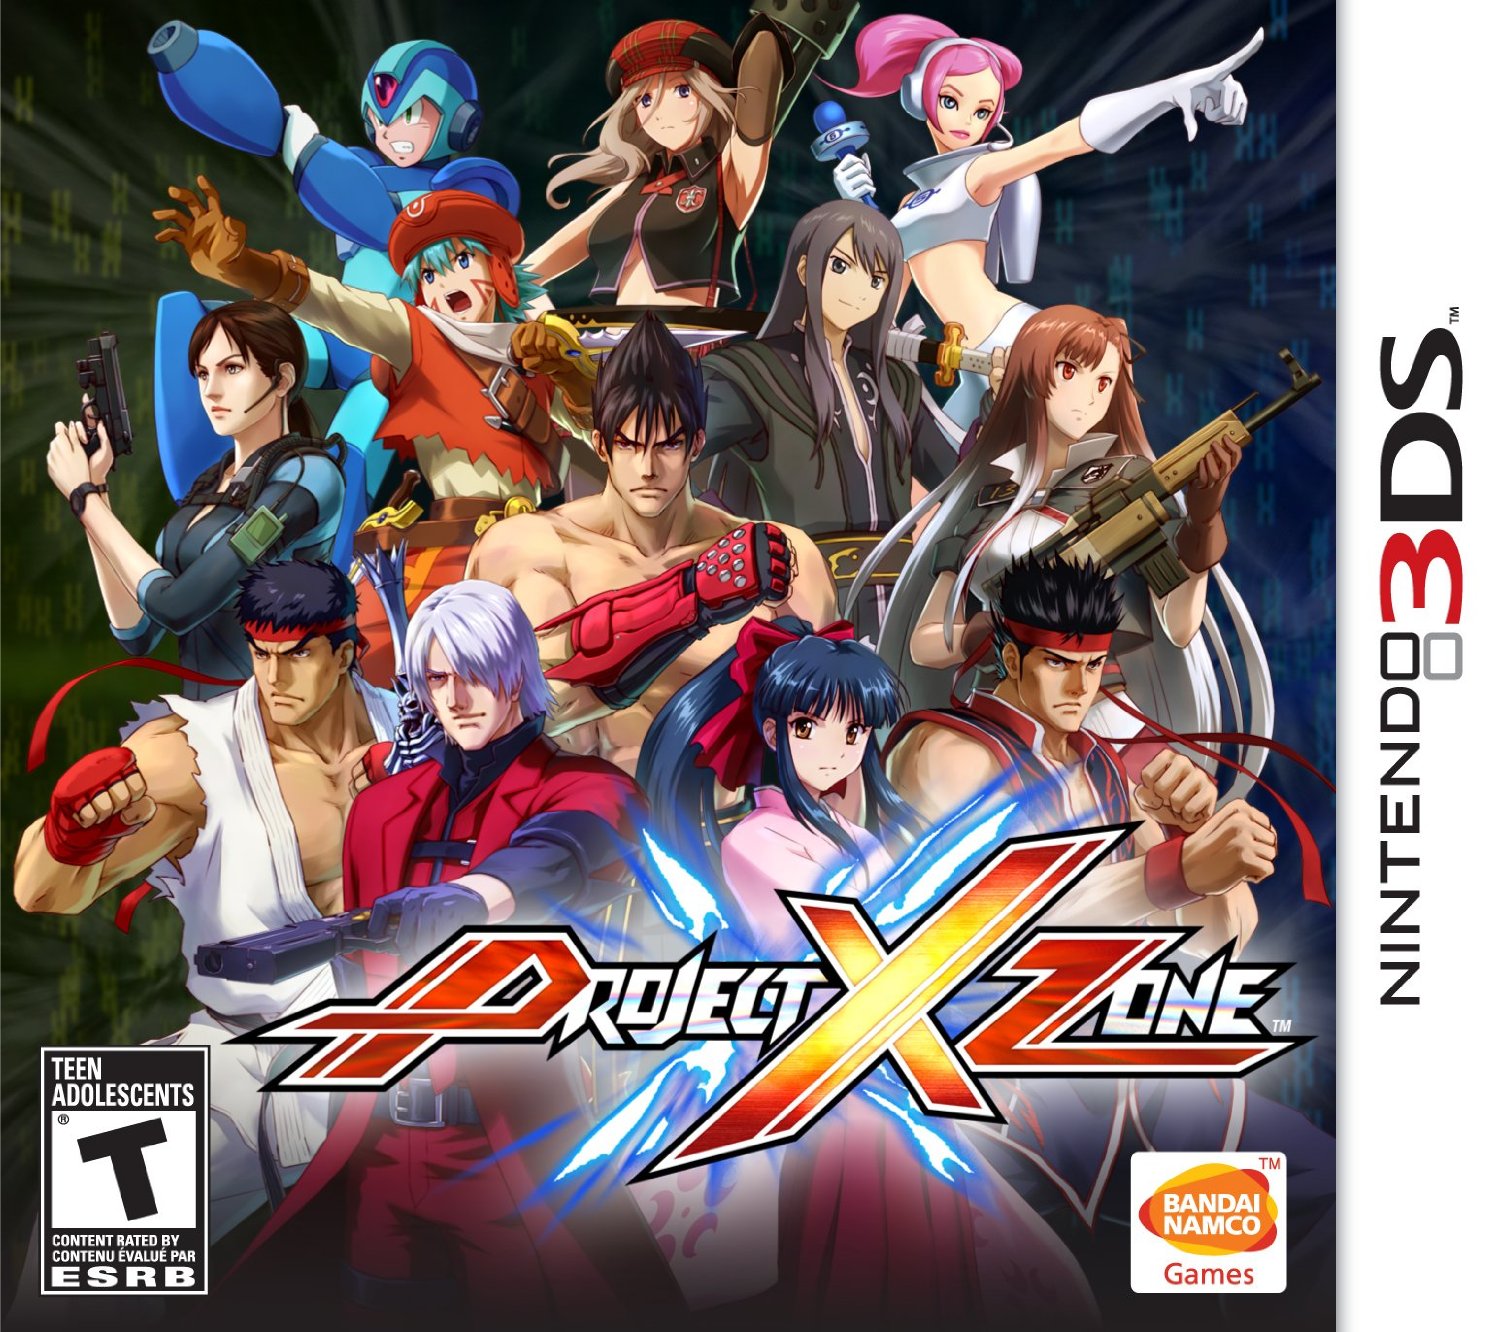 Project X Zone 2: Brave New World 3DS Review